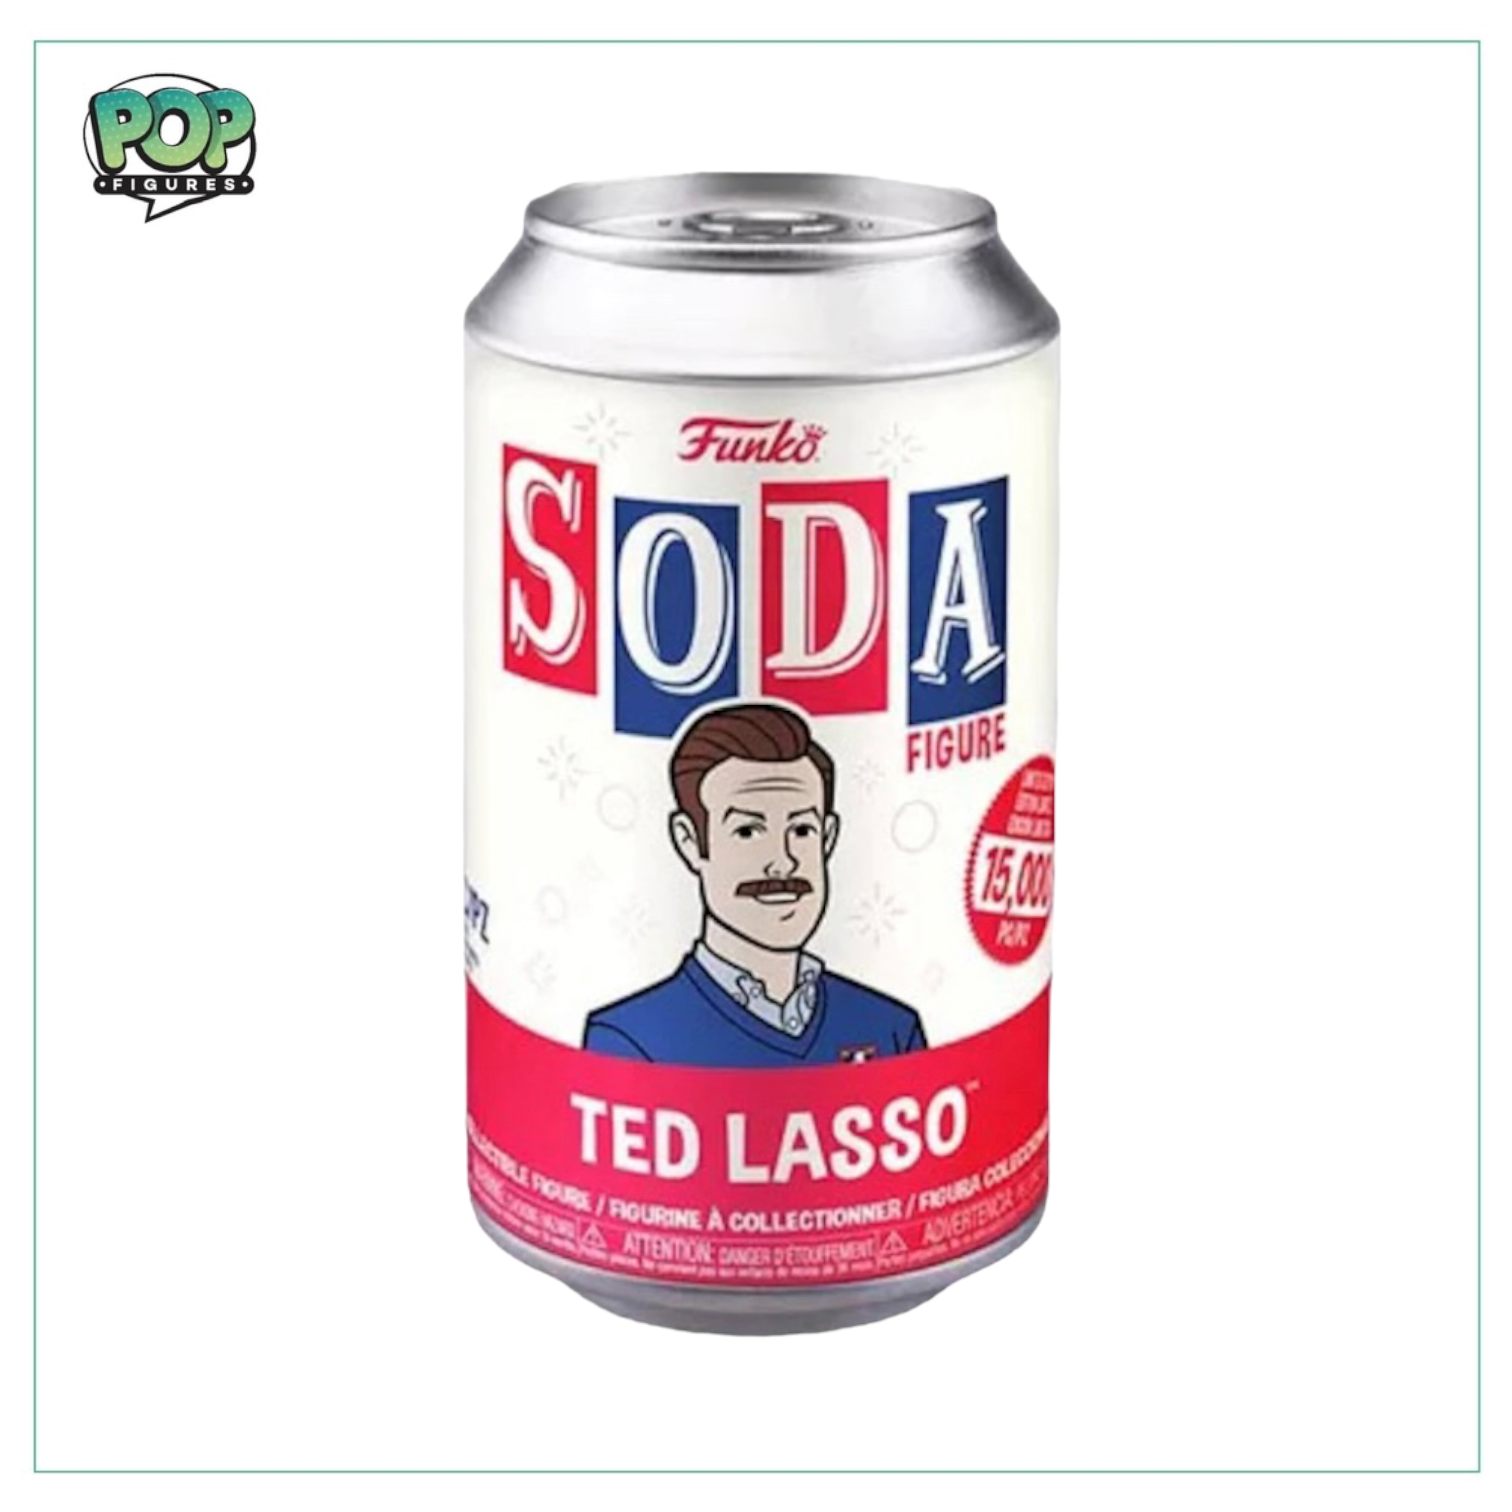 Ted Lasso Funko Soda Vinyl Figure! - Television- LE15000 Pcs - Chance Of Chase